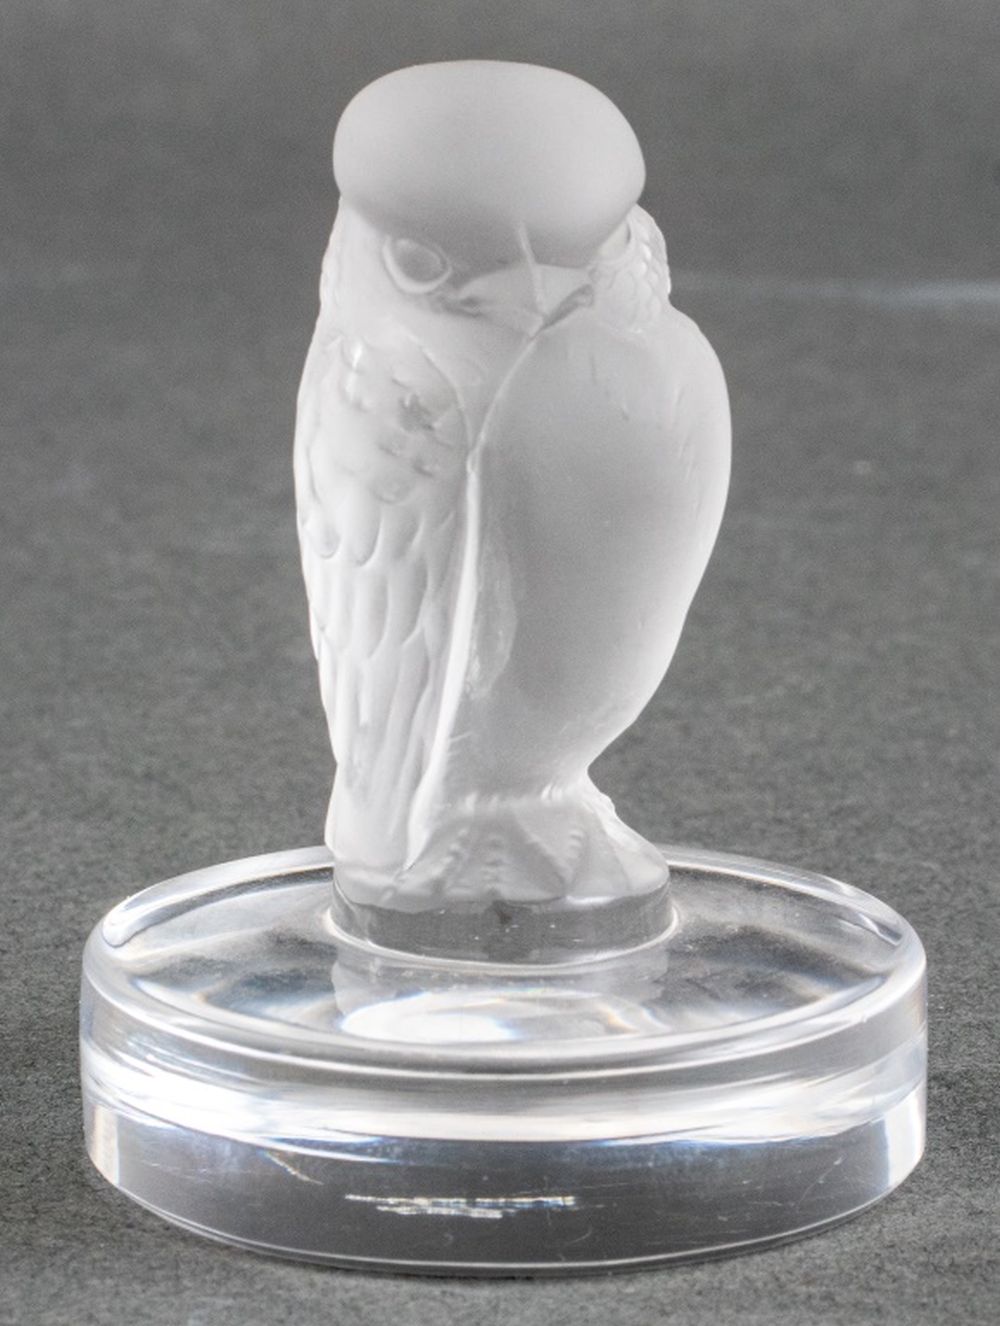 LALIQUE BIRD FROSTED GLASS SCULPTURE 2bbc70